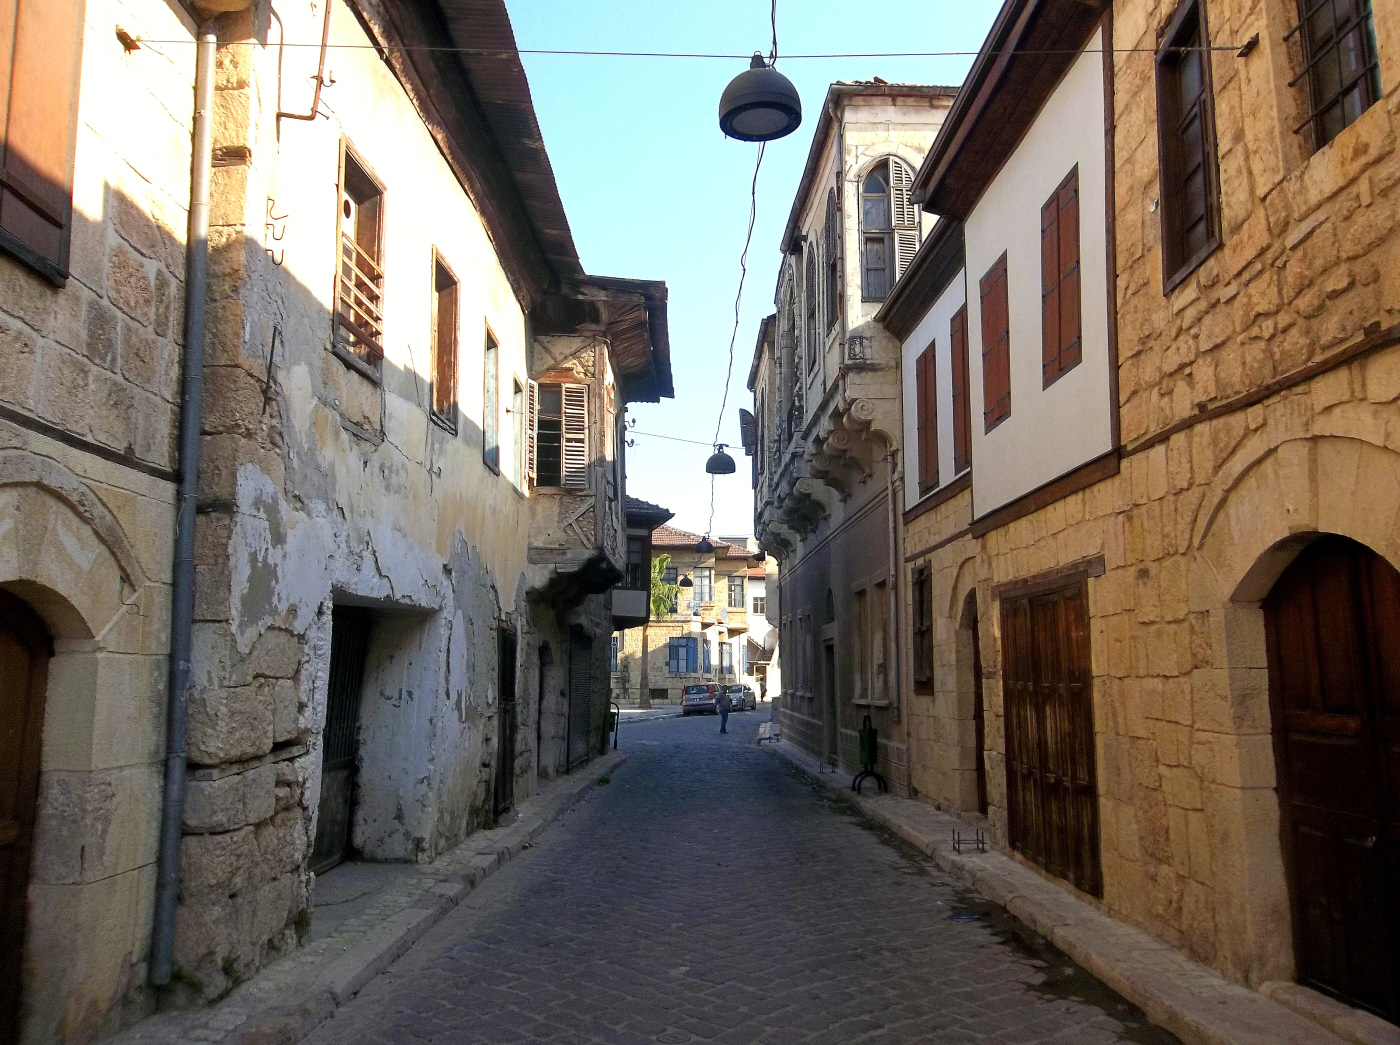 Road to St. Paul's Well & Family Home - Tarsus, Turkey